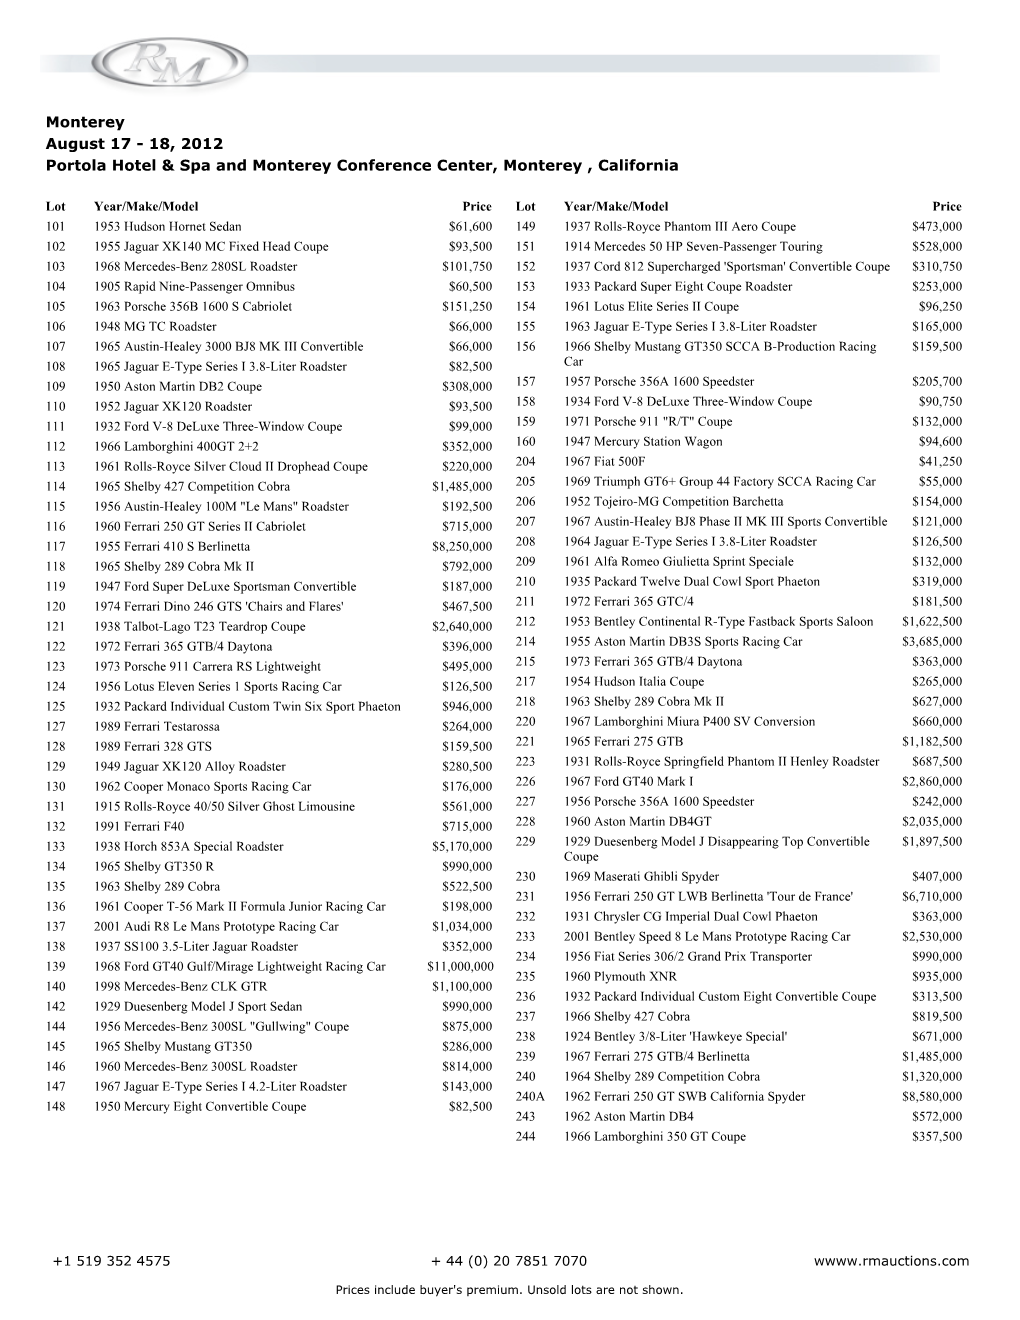 RM Auctions Monterey Results.Pdf